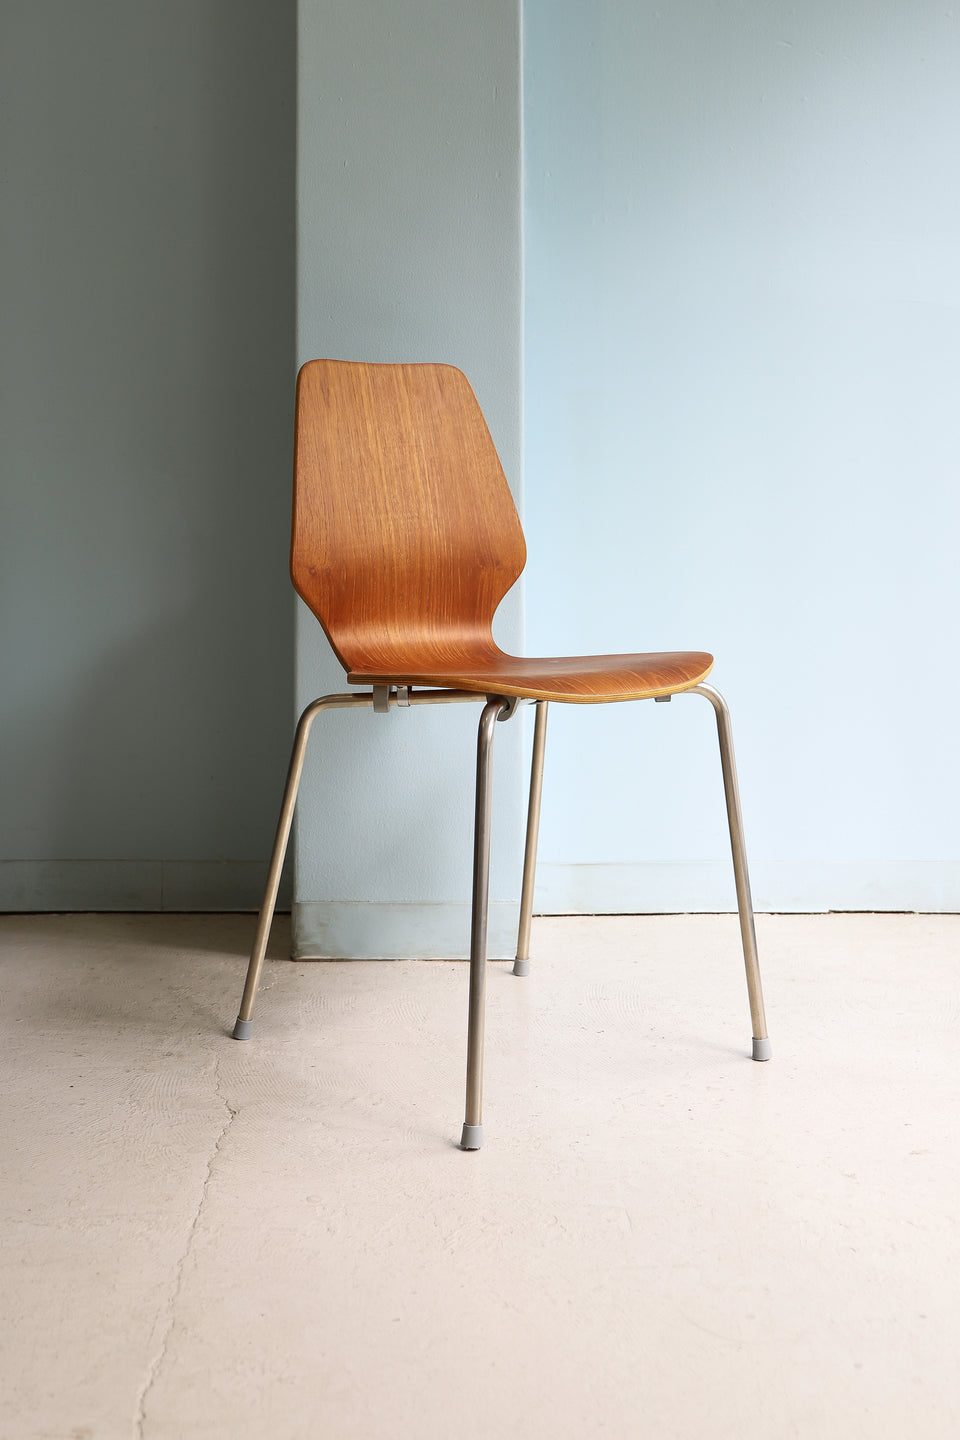 Teak Plywood Stacking Chair Danish Vintage/デンマークヴィンテージ スタッキングチェア チーク プライウッド 椅子 北欧家具